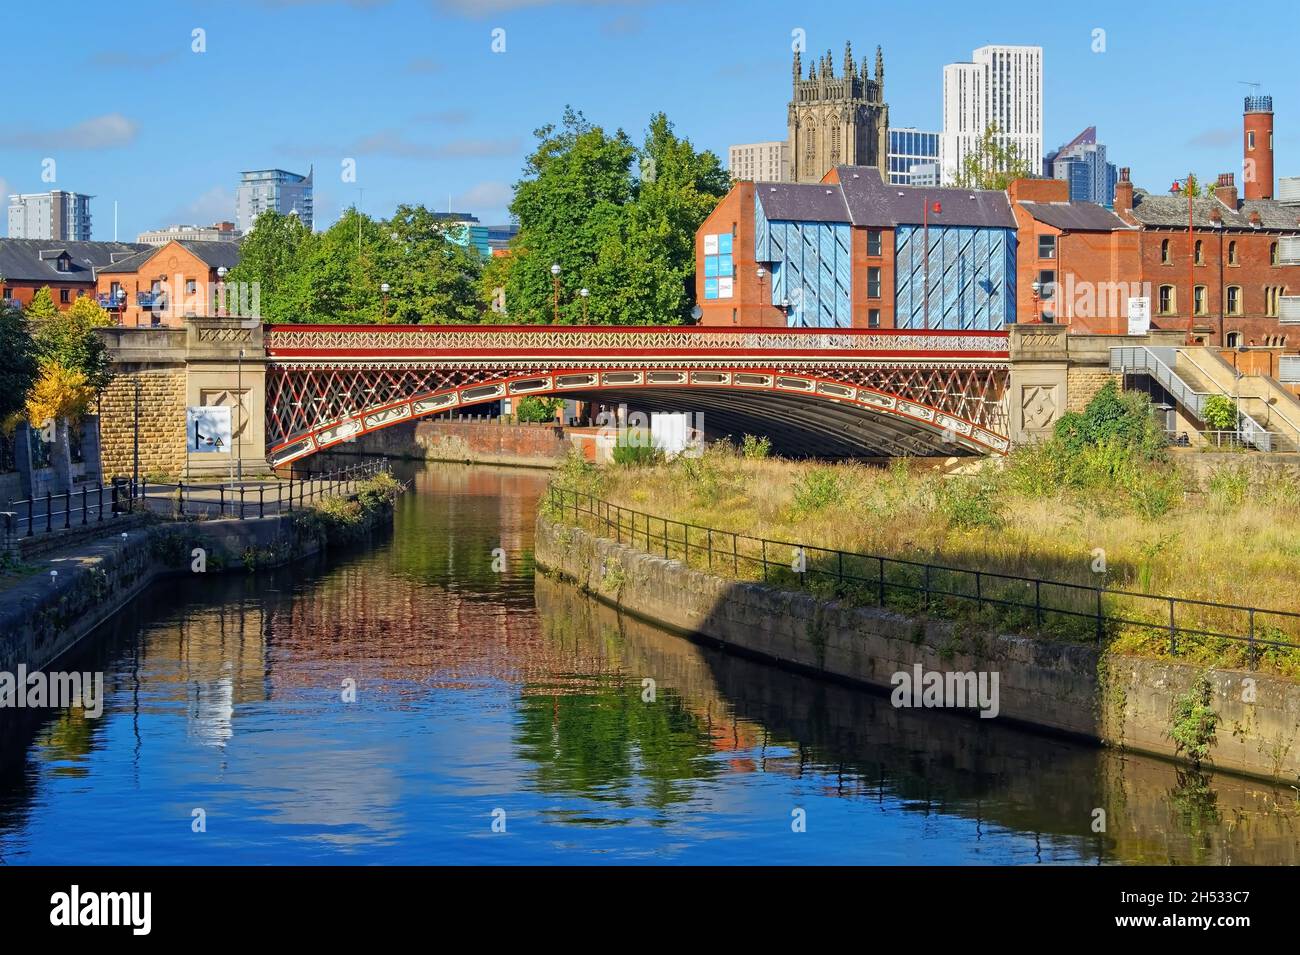 UK, West Yorkshire, Leeds, Crown Point Bridge over the River Aire, with Leeds Minster and Altus Building dominating the skyline. Stock Photo